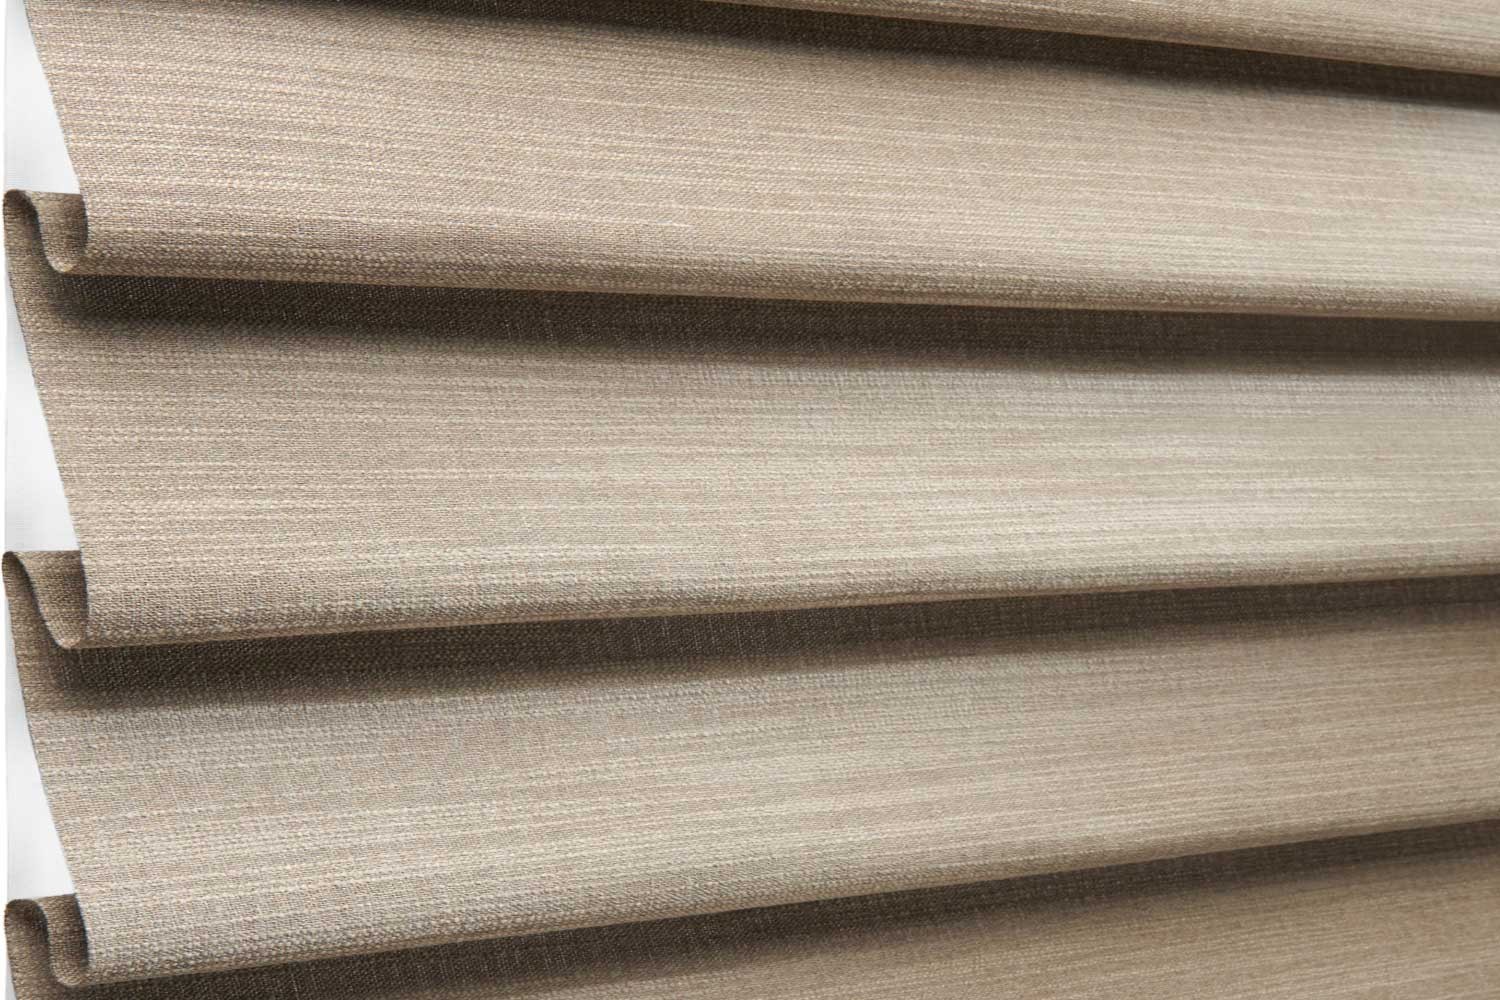 Modern Roman Shade Folds - Modern Roman Shade Folds - Roman shades come into fabric styles - Flat Fold Style and Soft Contoured Fold Style. Both styles are clutter-free